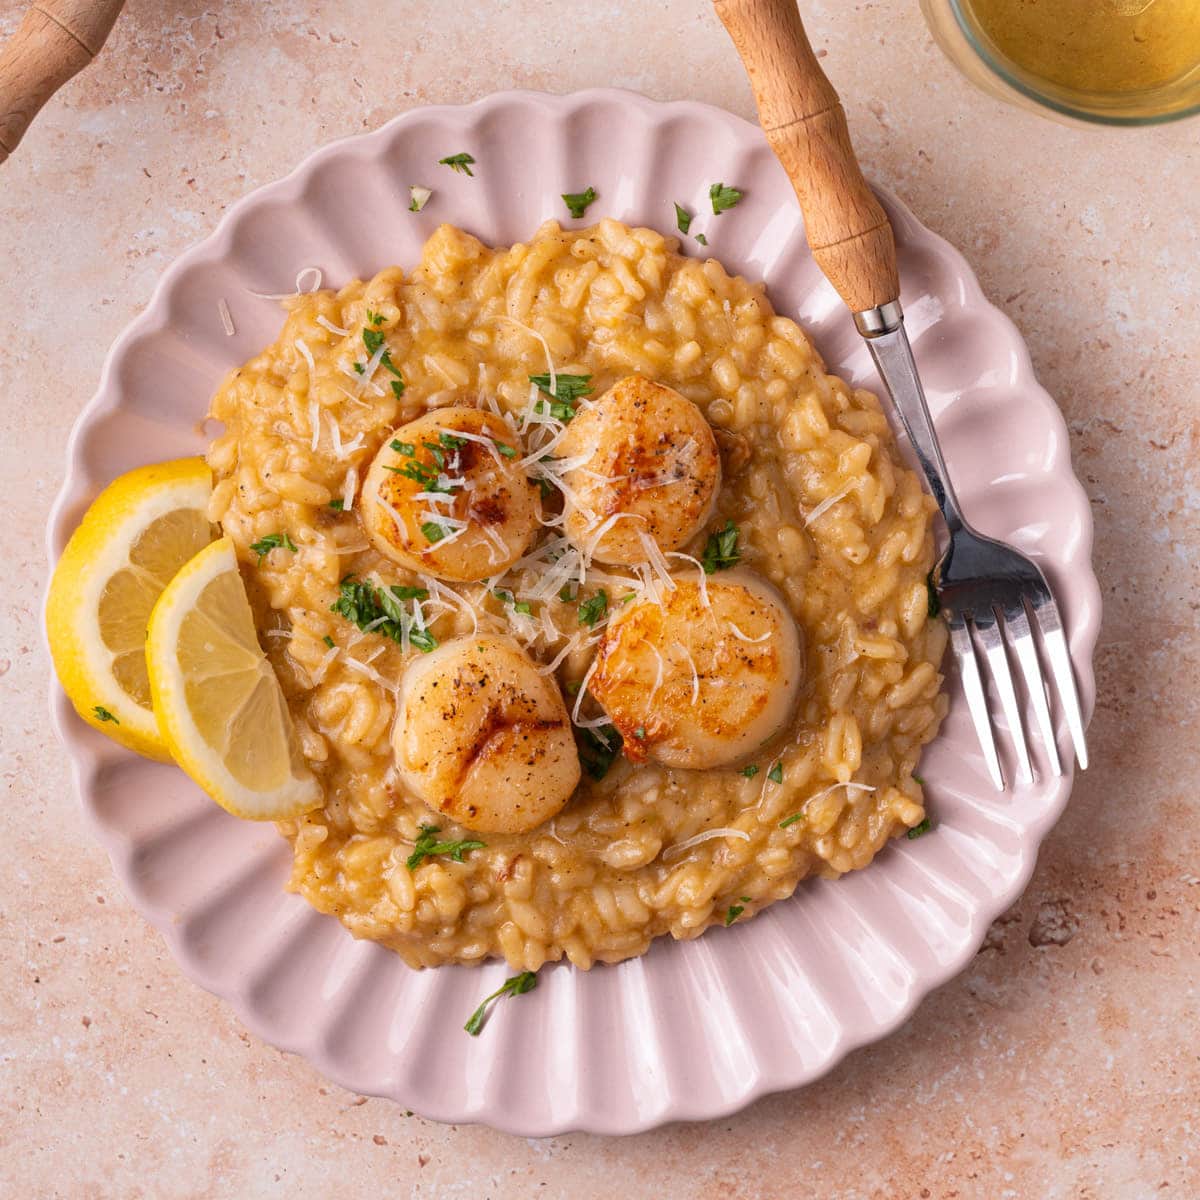 Scallop risotto served with lemon wedges on a pink plate.